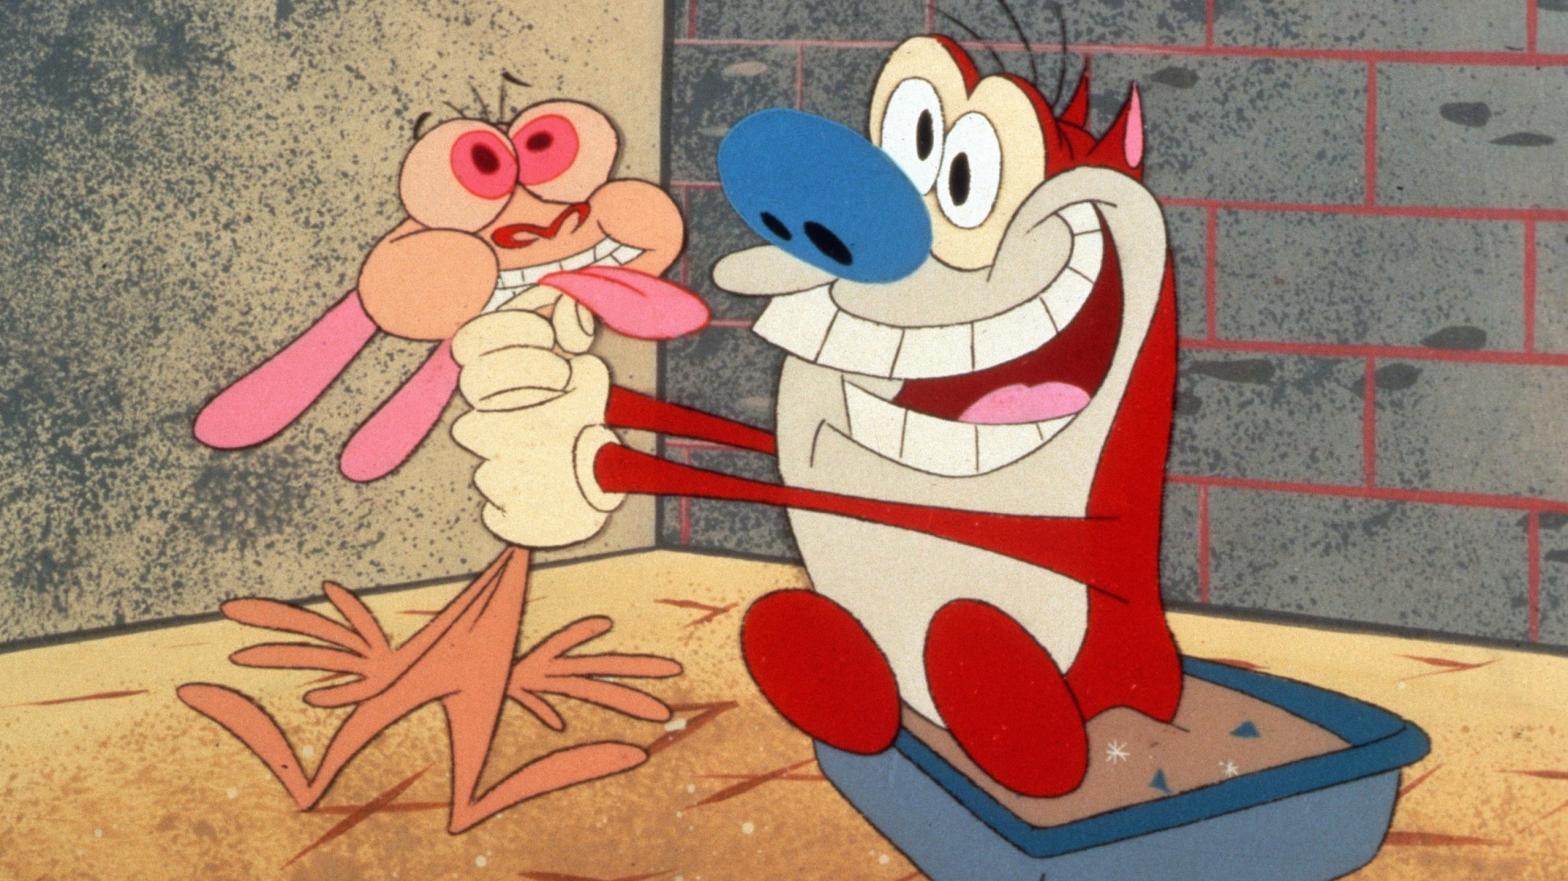 Stimpy choking Ren while sitting in a litterbox. (Image: NIckelodeon)